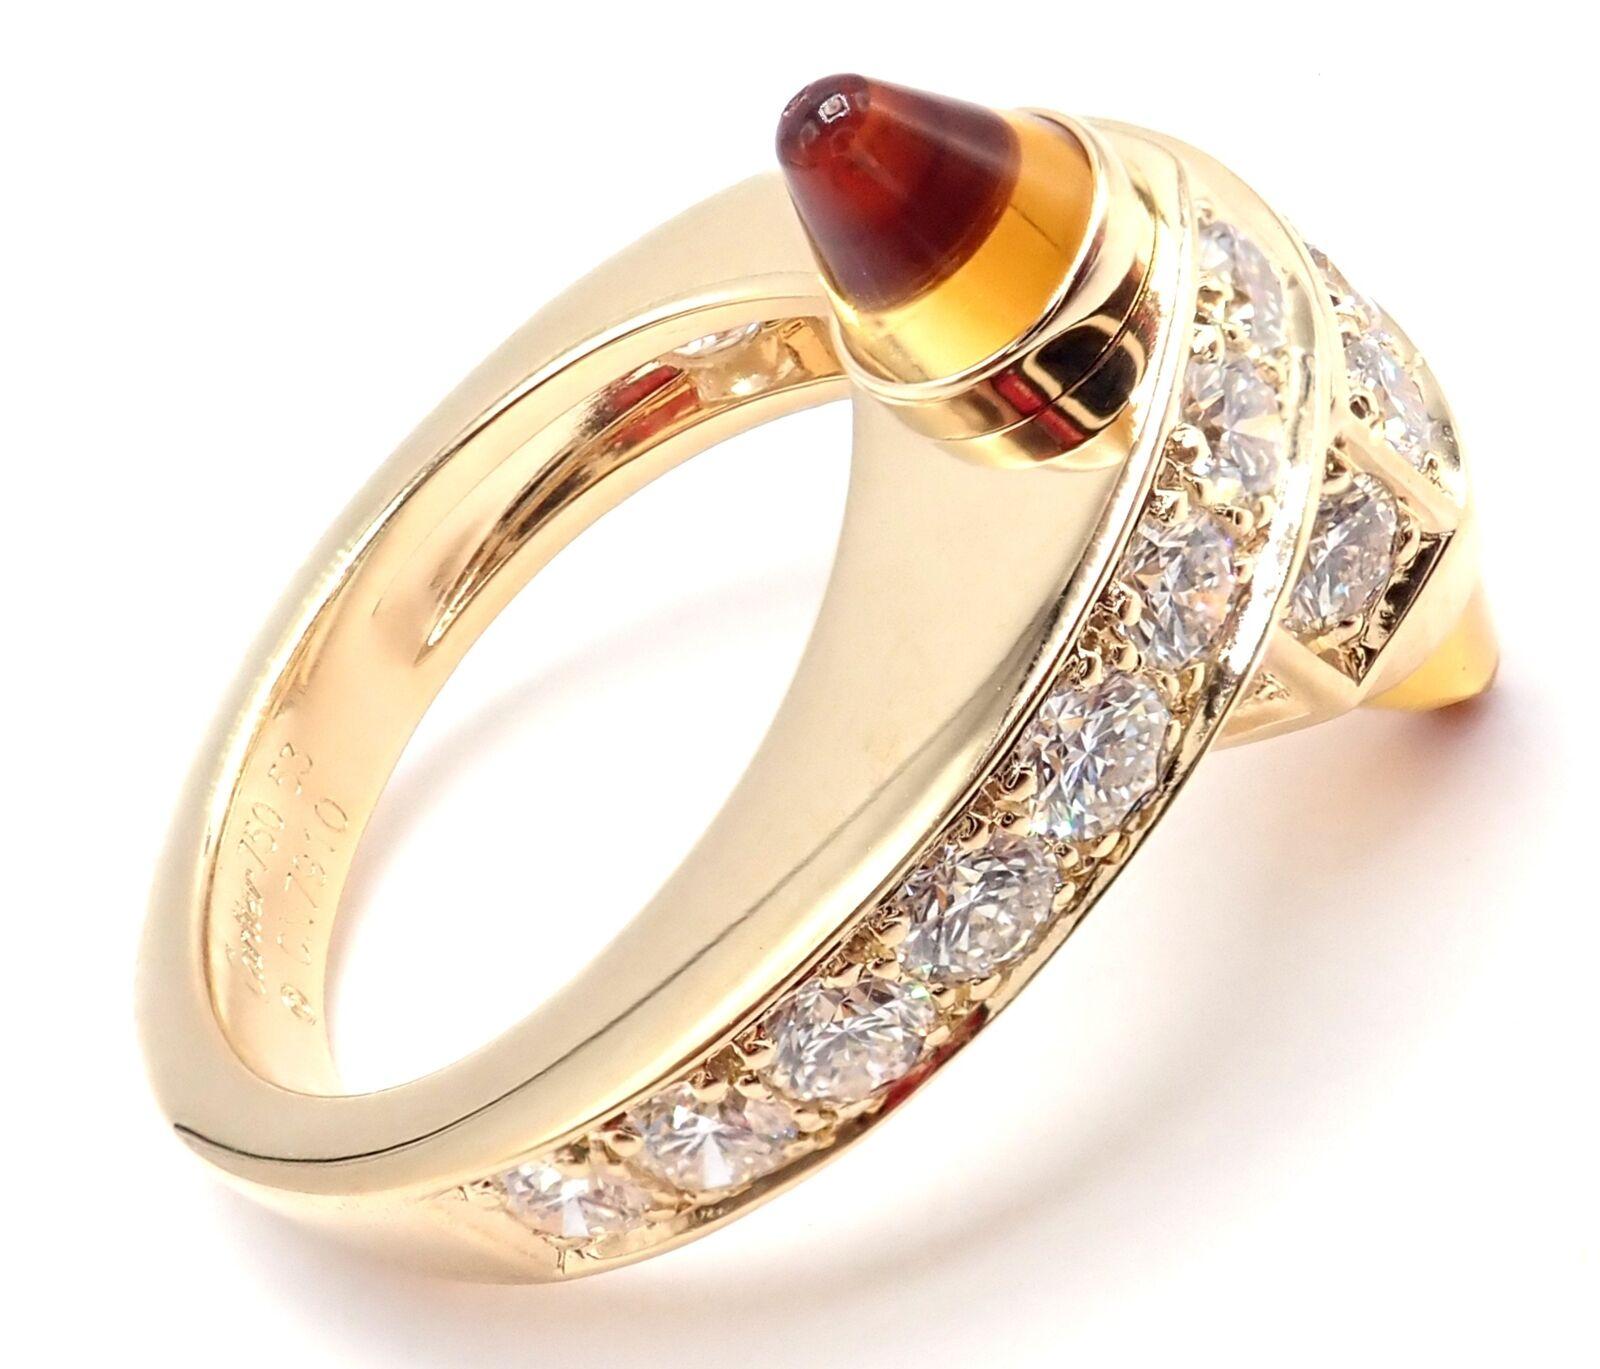 18k Yellow Gold Diamond and Citrine Menotte Band Ring by Cartier.  
With 20 round brilliant cut diamonds VVS1 clarity, G color total weight approximately 1.5ct
2 Citrine Stones
Details:  
Ring Size: European 53 US 6 1/2
Weight: 10 grams
Width: